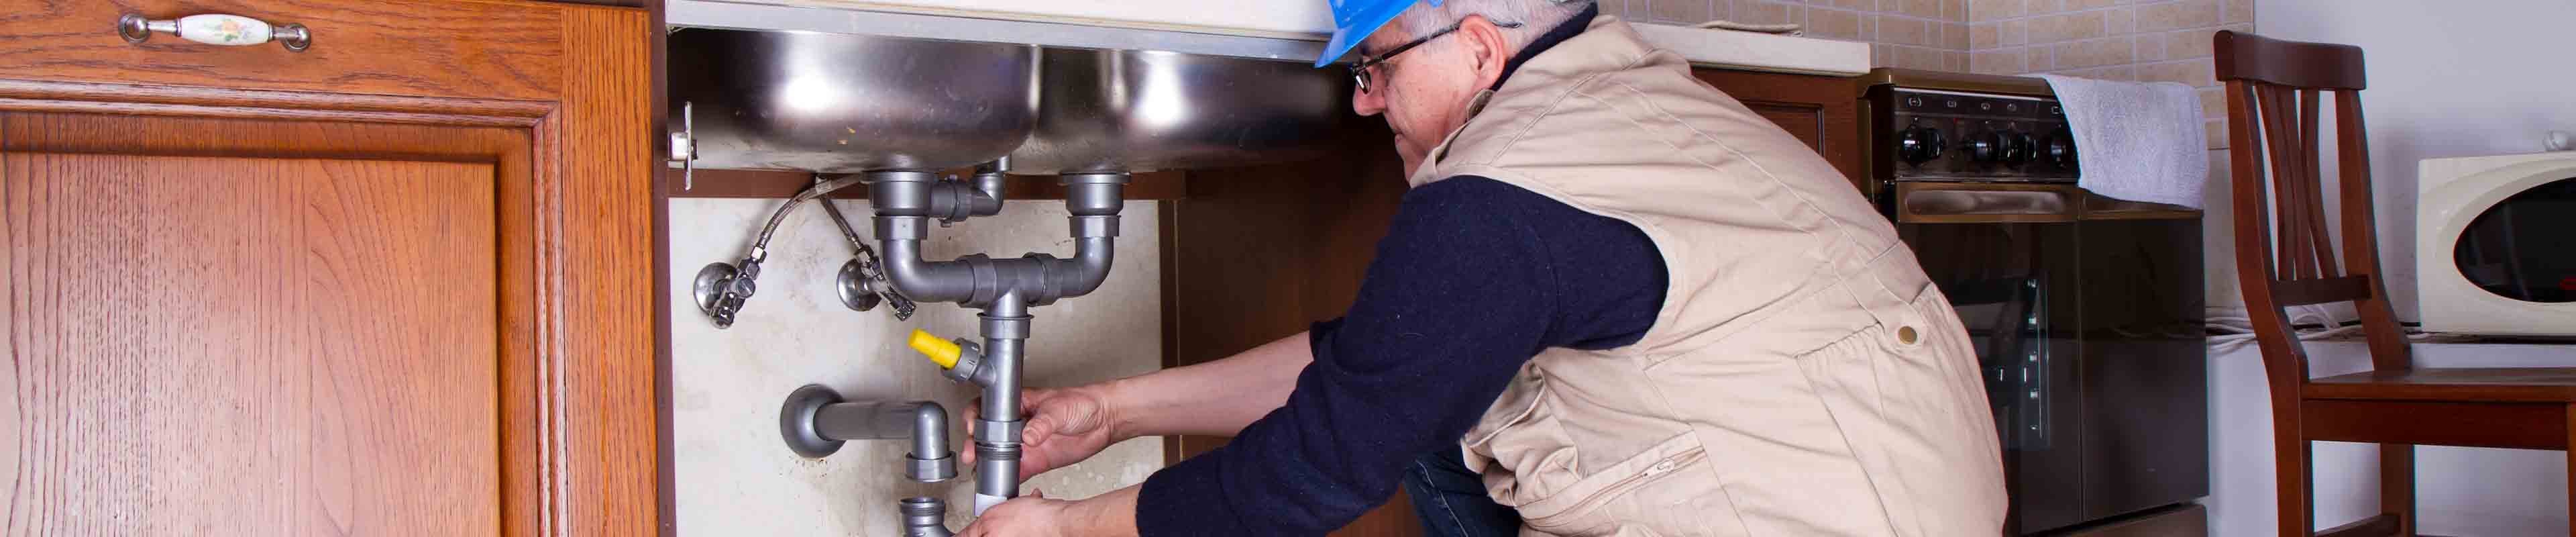 Image of a plumber making a repair to a rental unit's kitchen sink goose neck pipe.